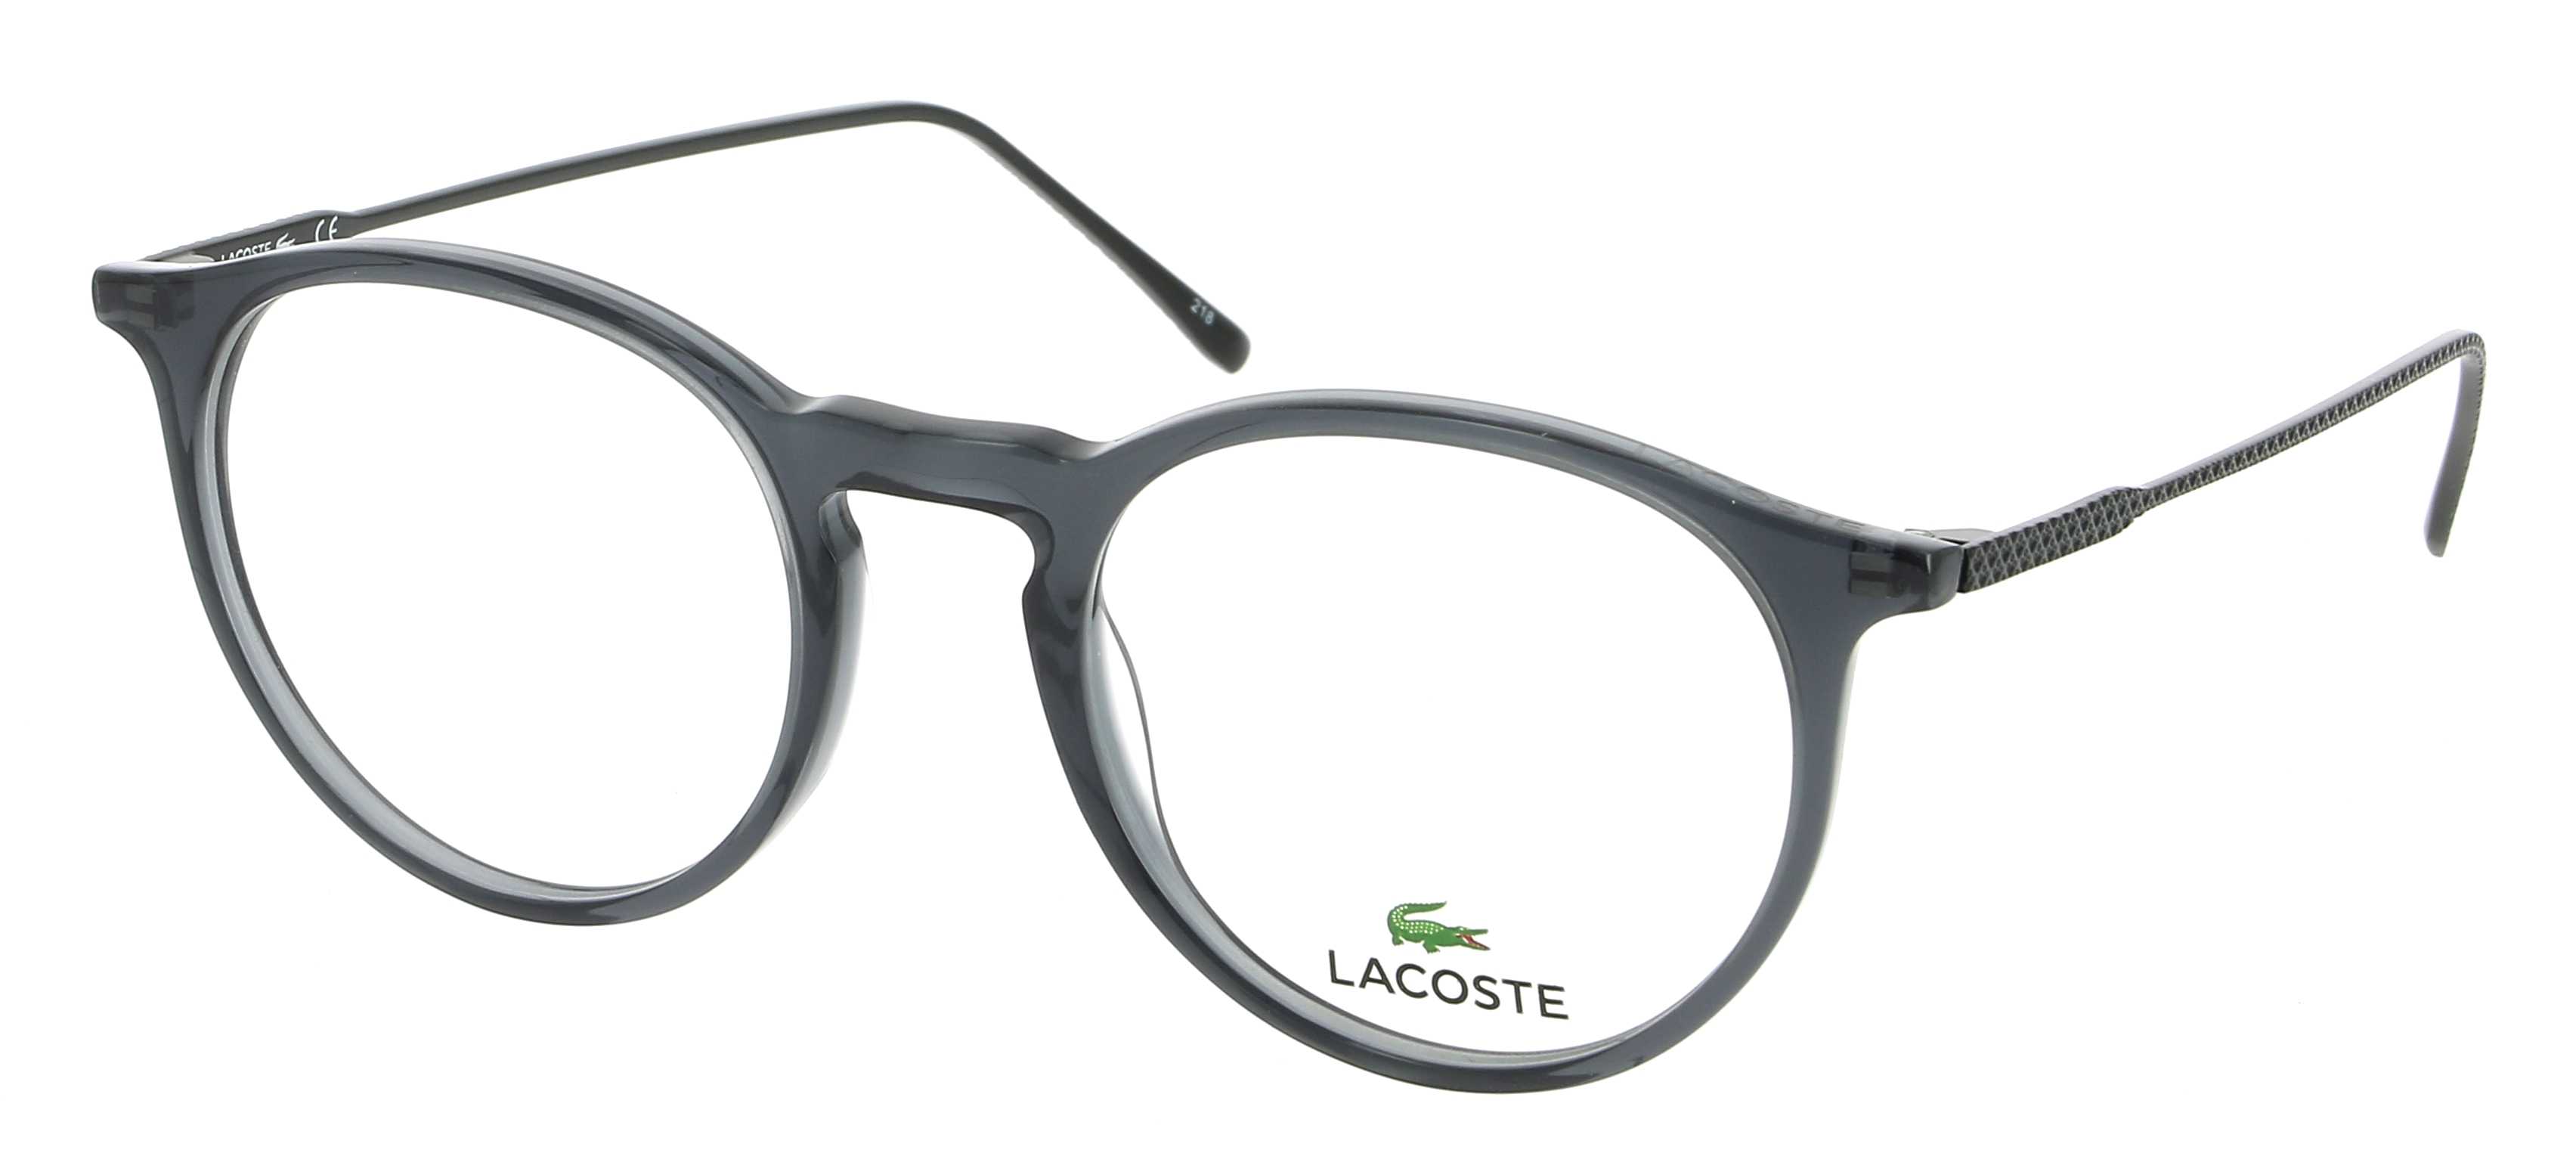 lacoste glasses review